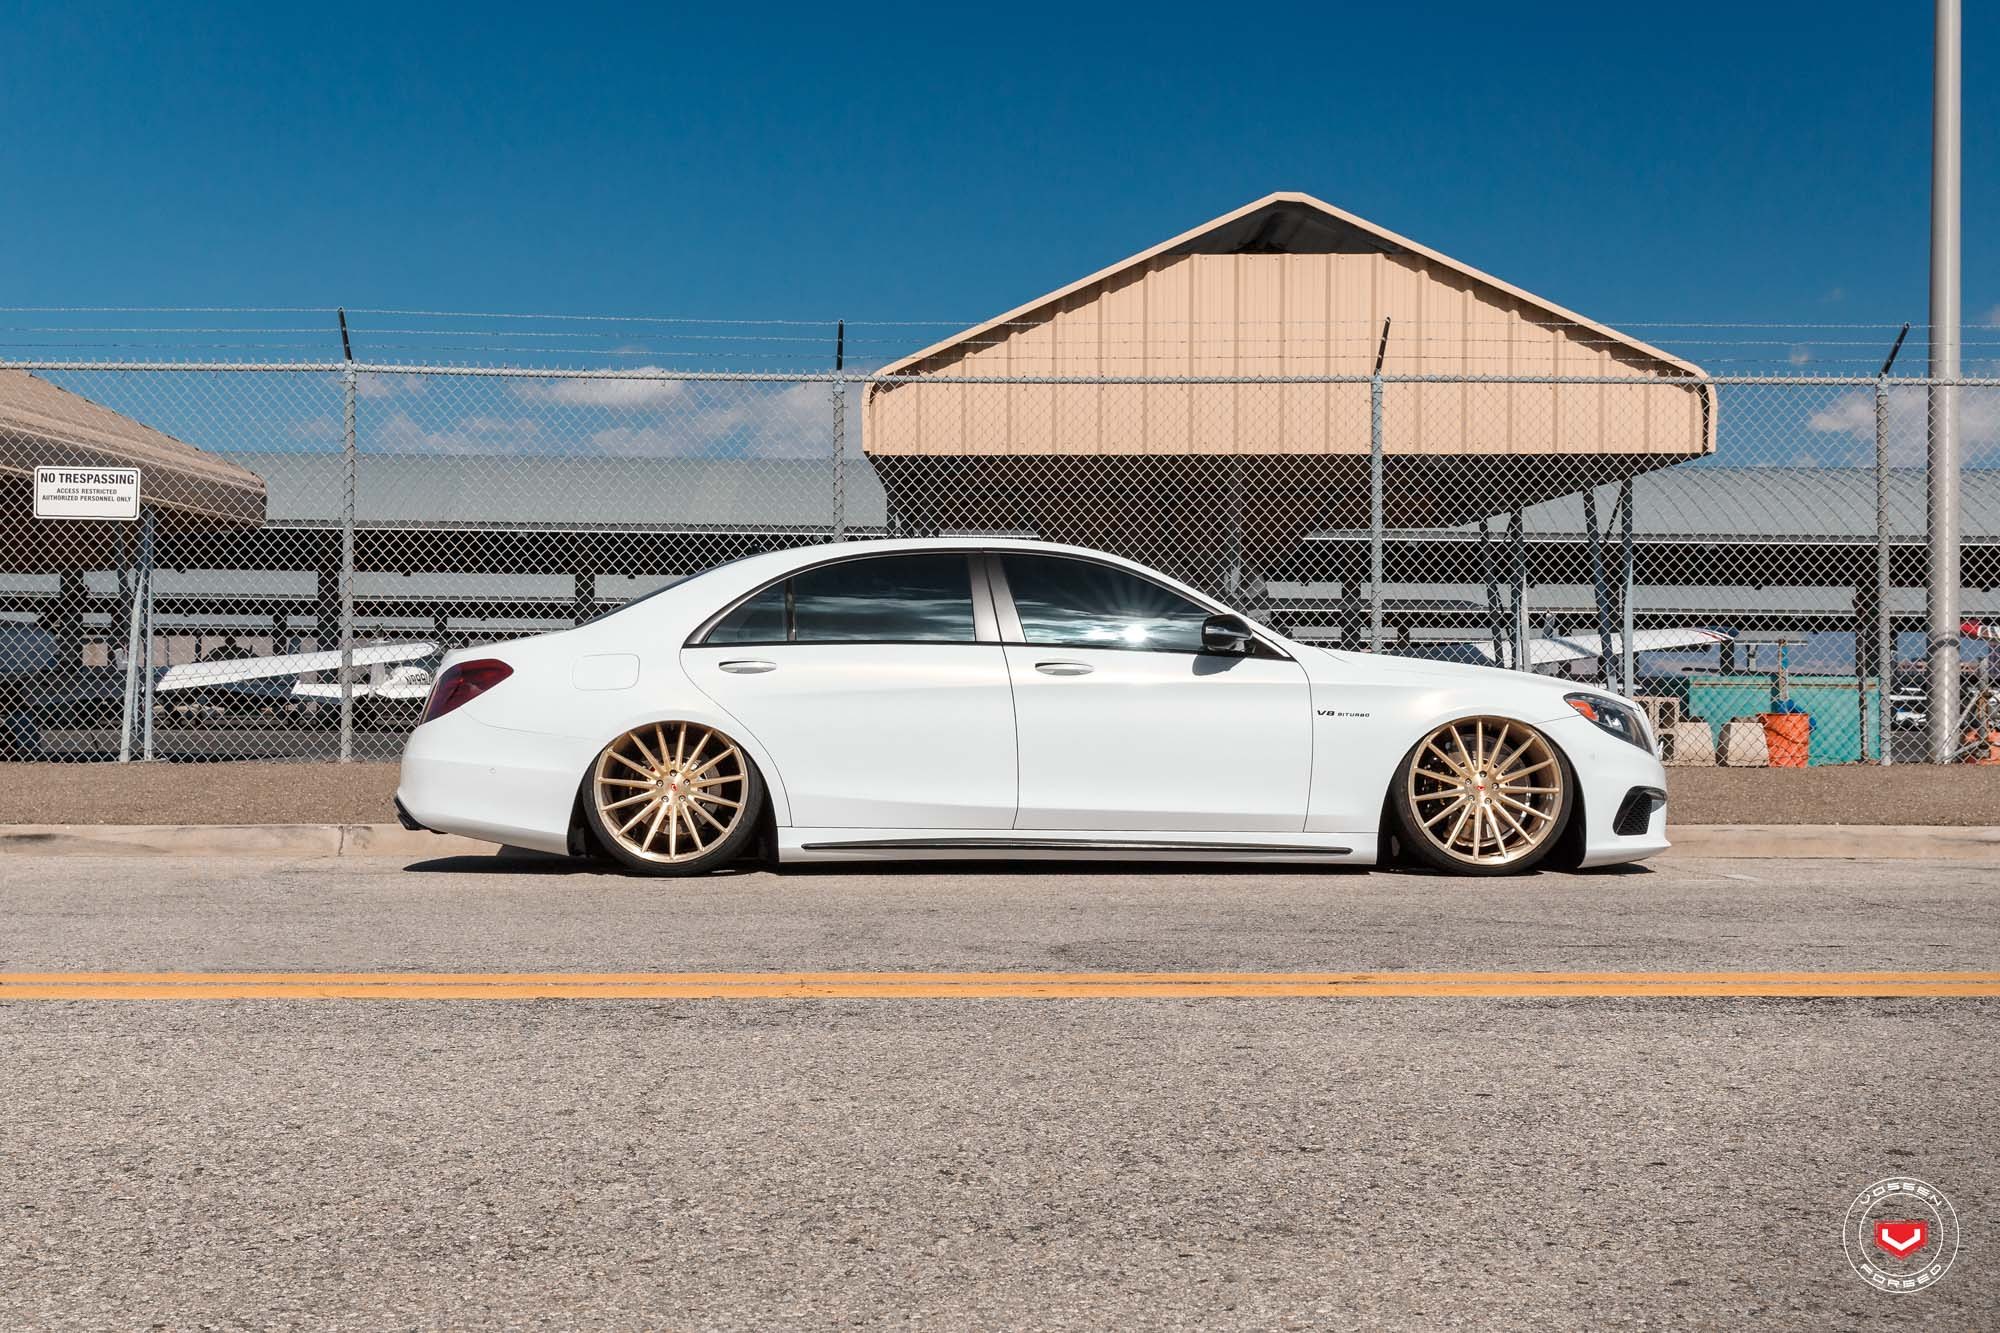 Aftermarket Side Skirts on White Mercedes S Class - Photo by Vossen